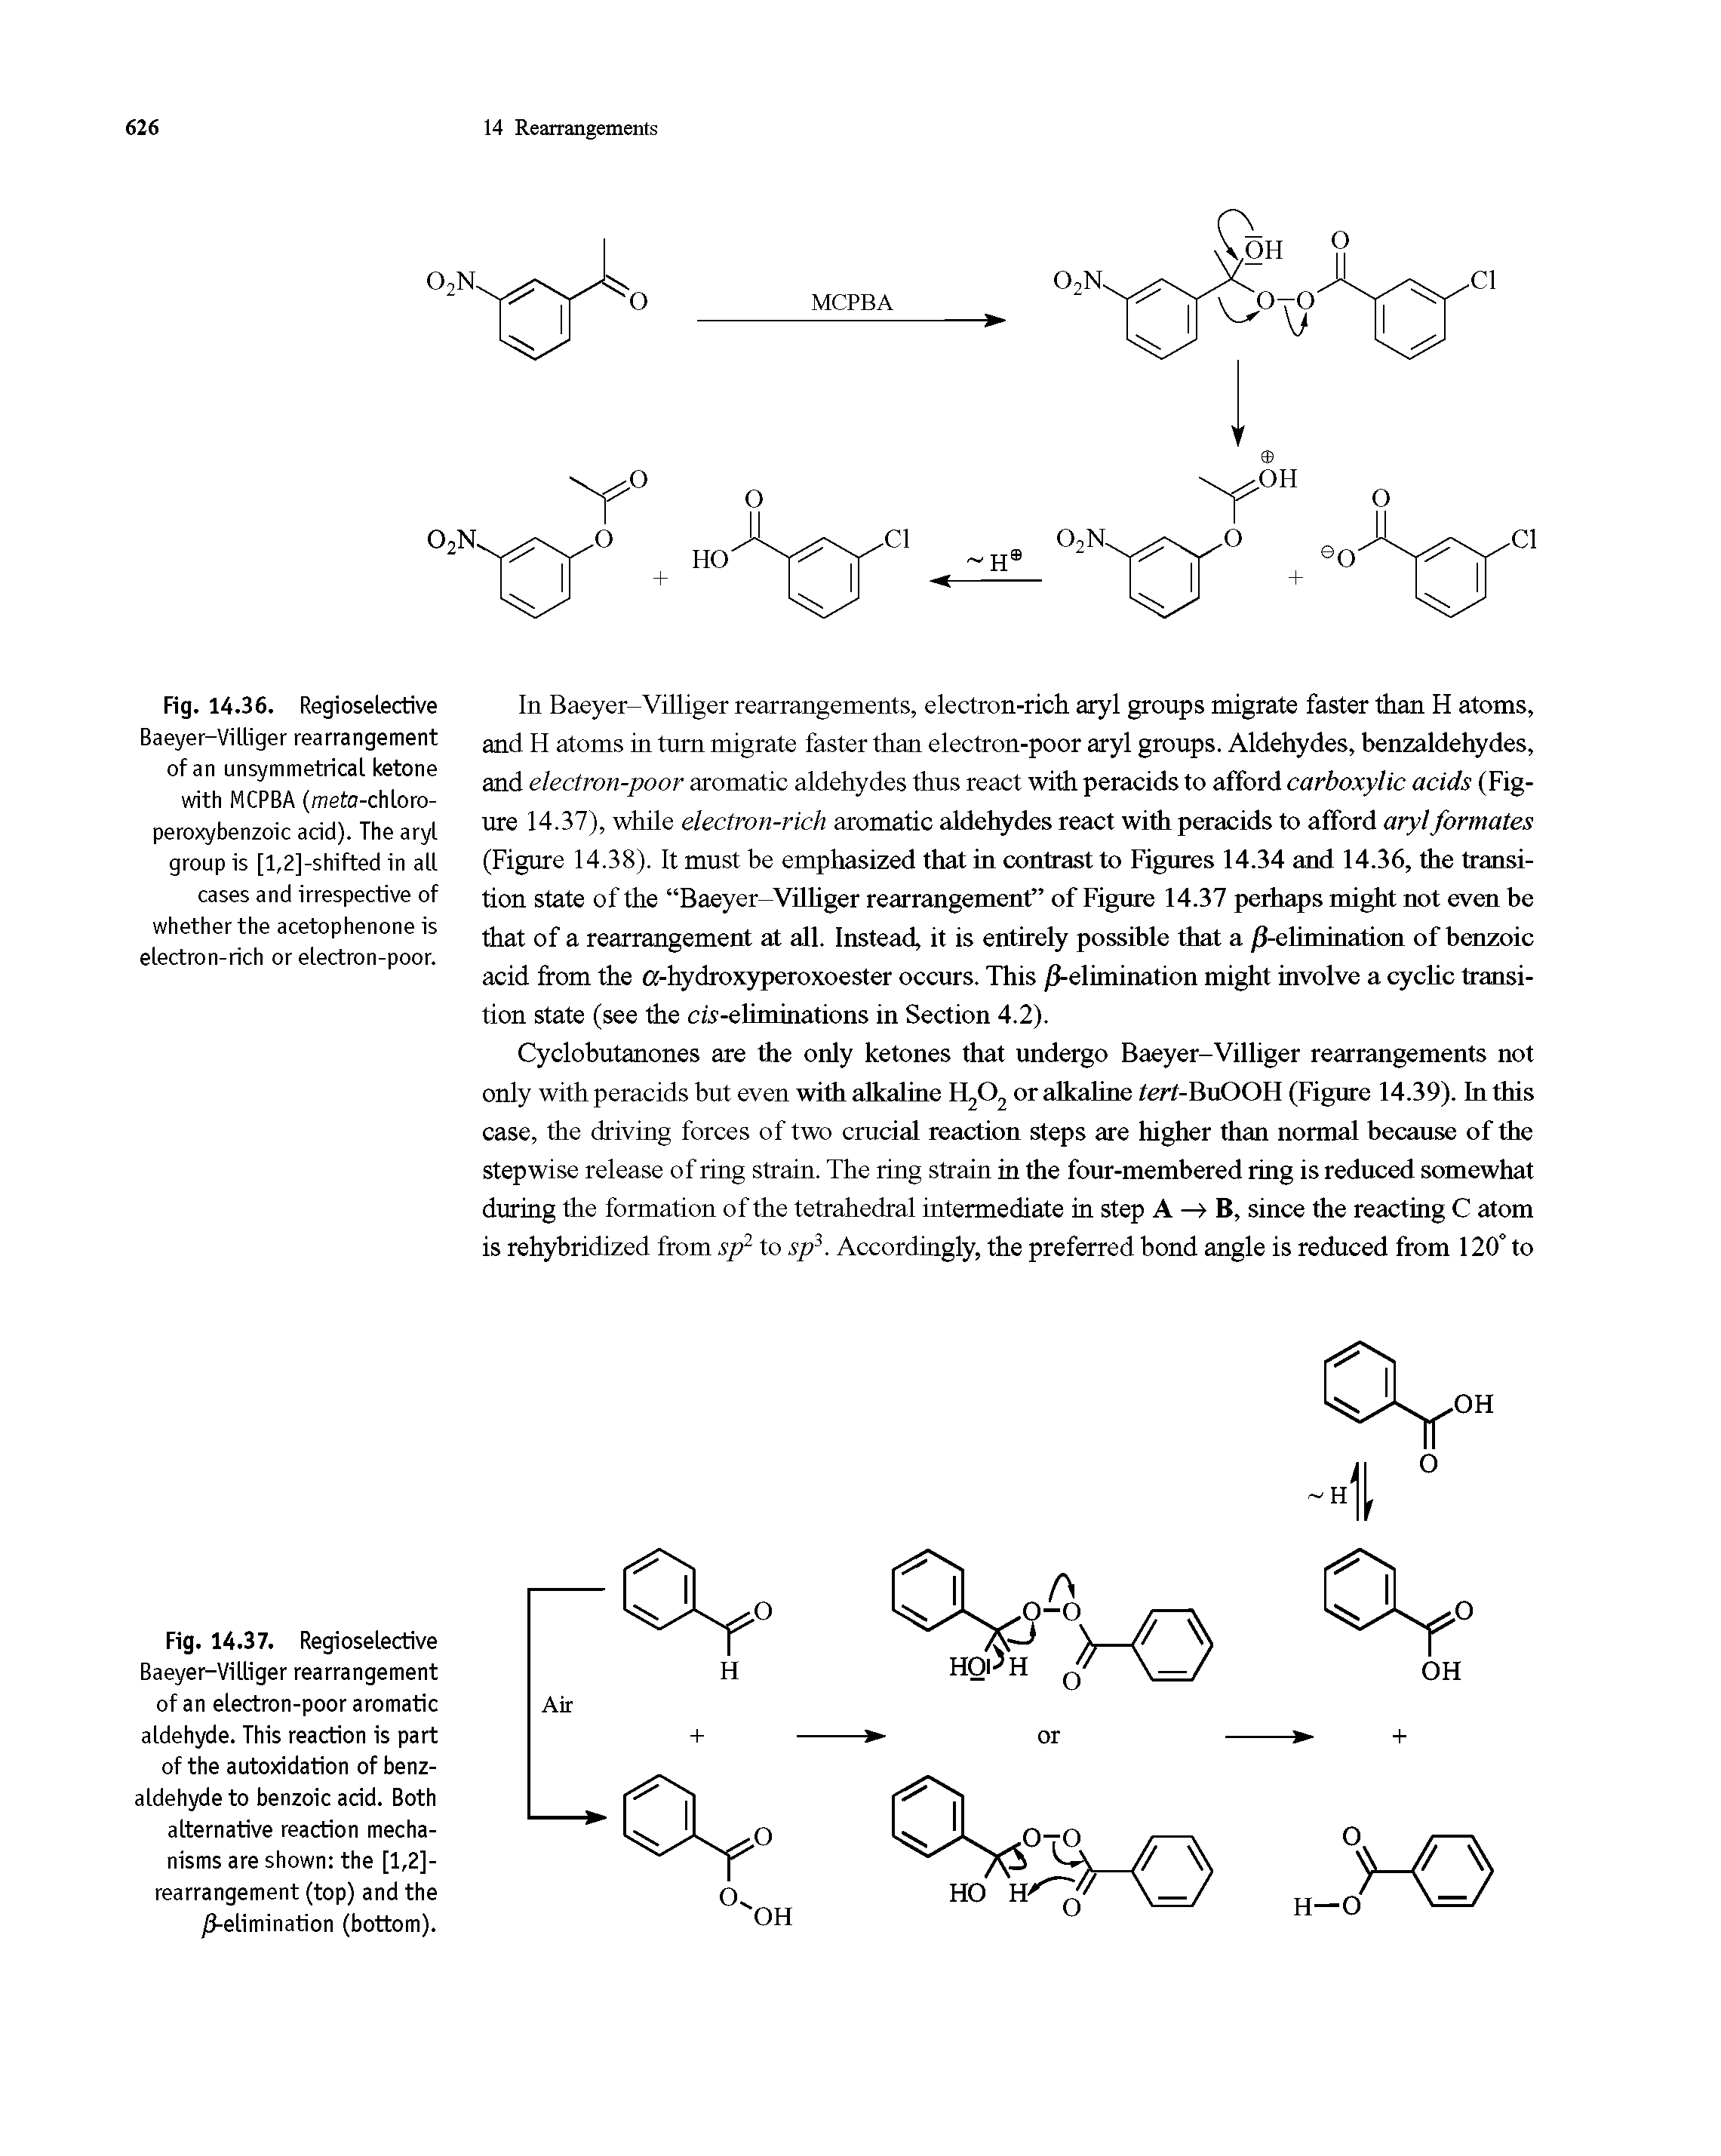 Fig. 14.37. Regioselective Baeyer-Villiger rearrangement of an electron-poor aromatic aldehyde. This reaction is part of the autoxidation of benz-aldehyde to benzoic acid. Both alternative reaction mechanisms are shown the [1,21-rearrangement (top) and the /3-elimination (bottom).